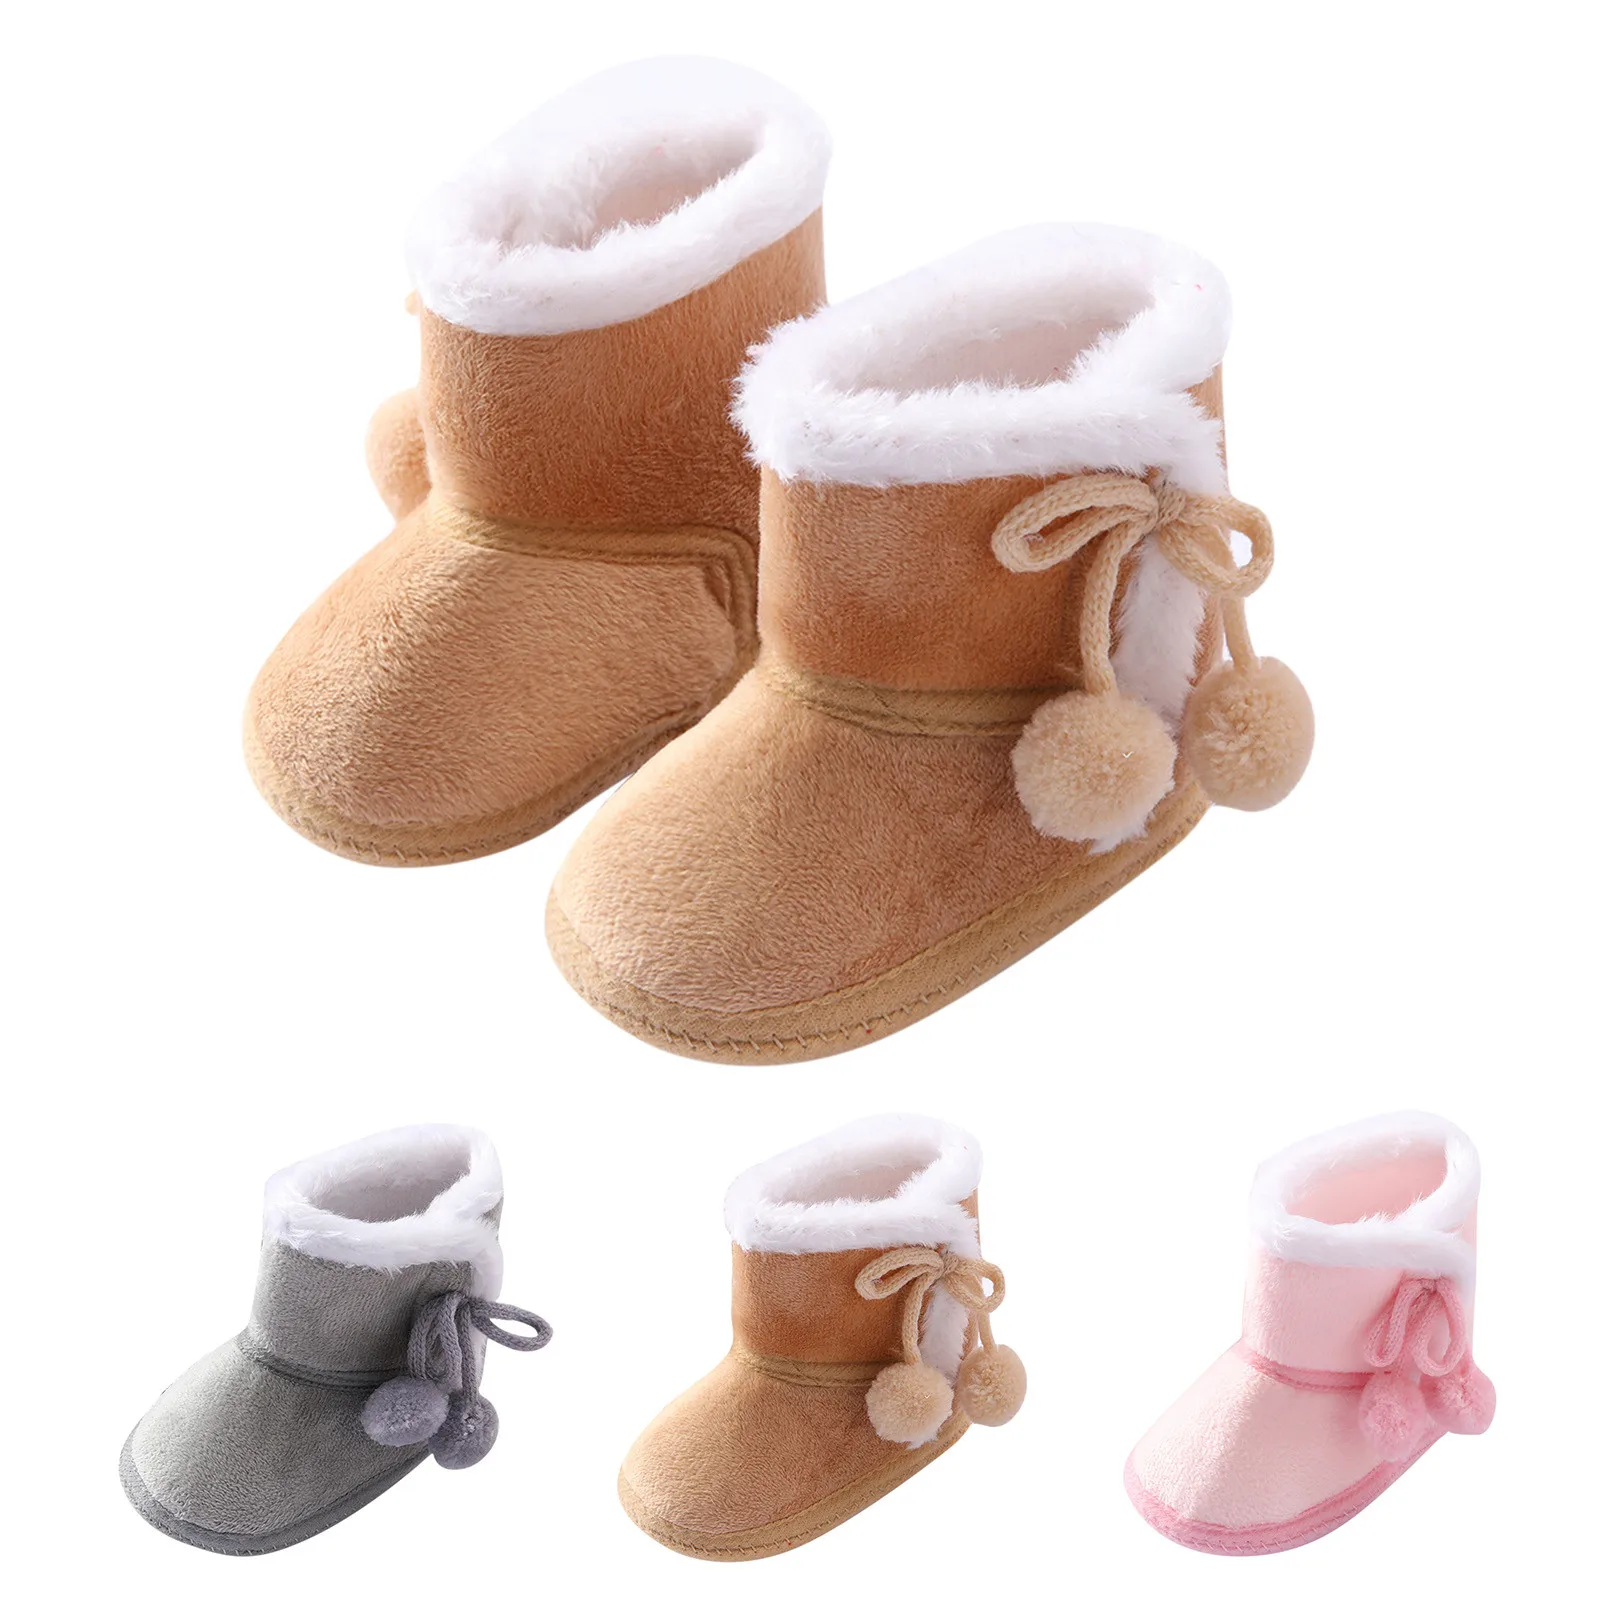 Baby Girls Boys Soft Booties Snow Boots Infant Toddler Newborn Warming Shoes Saingace Baby Shoes 